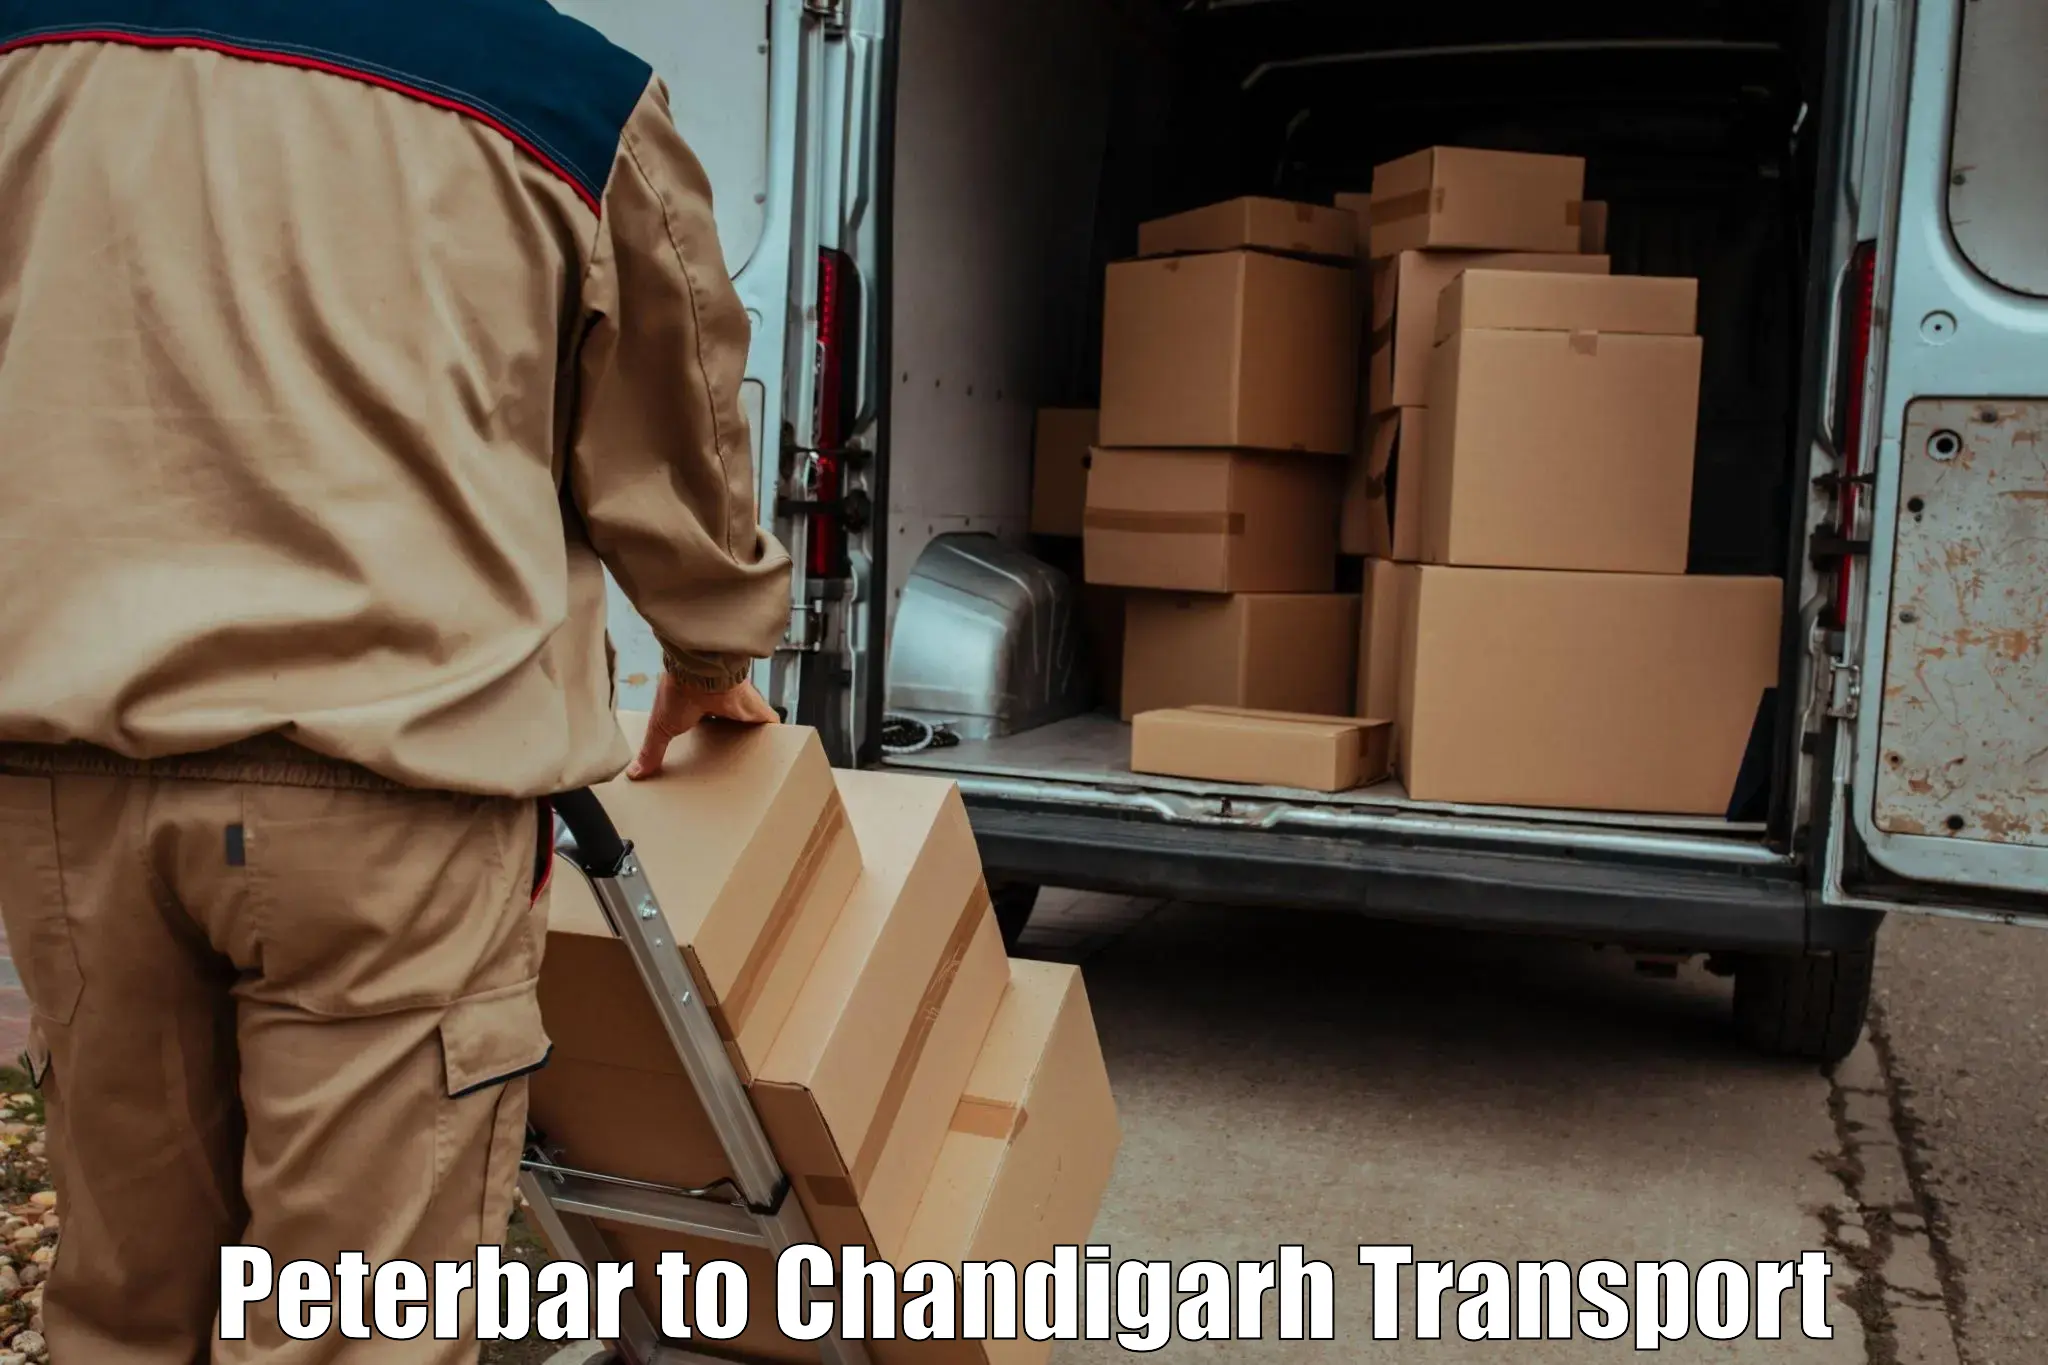 Daily parcel service transport Peterbar to Chandigarh